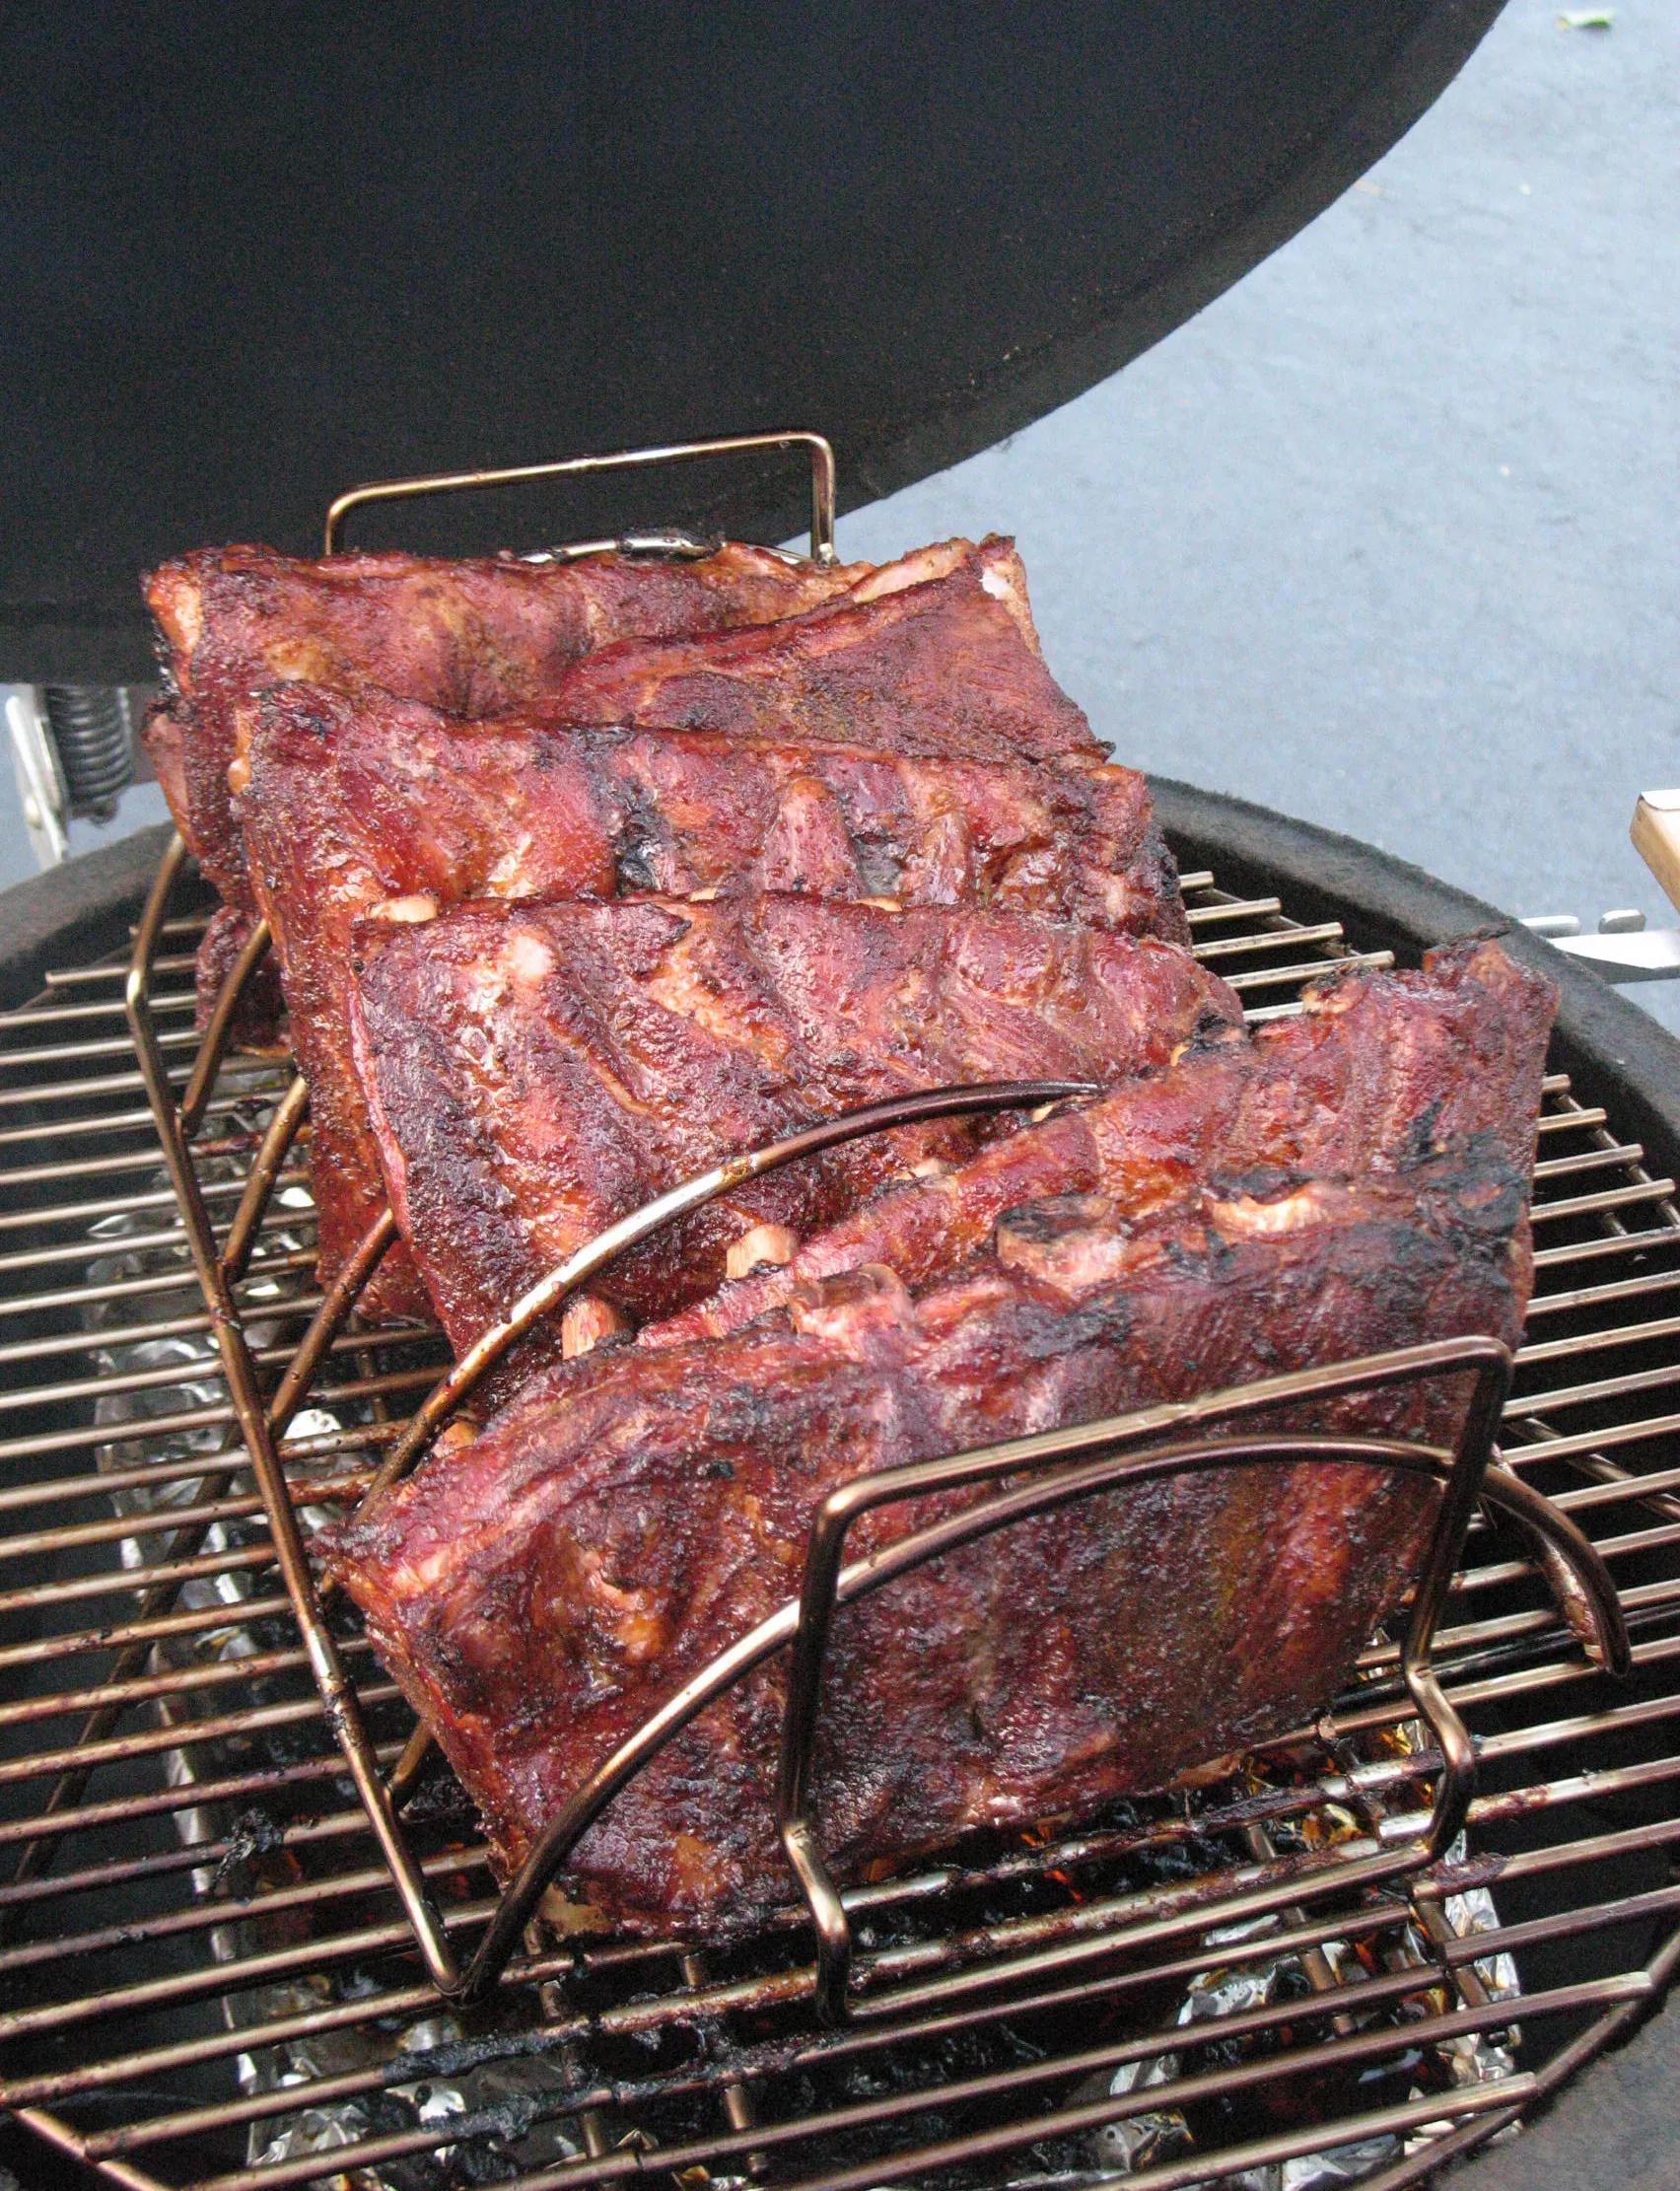 Ribs after being seared on a rib rack, using a Saffire kamado